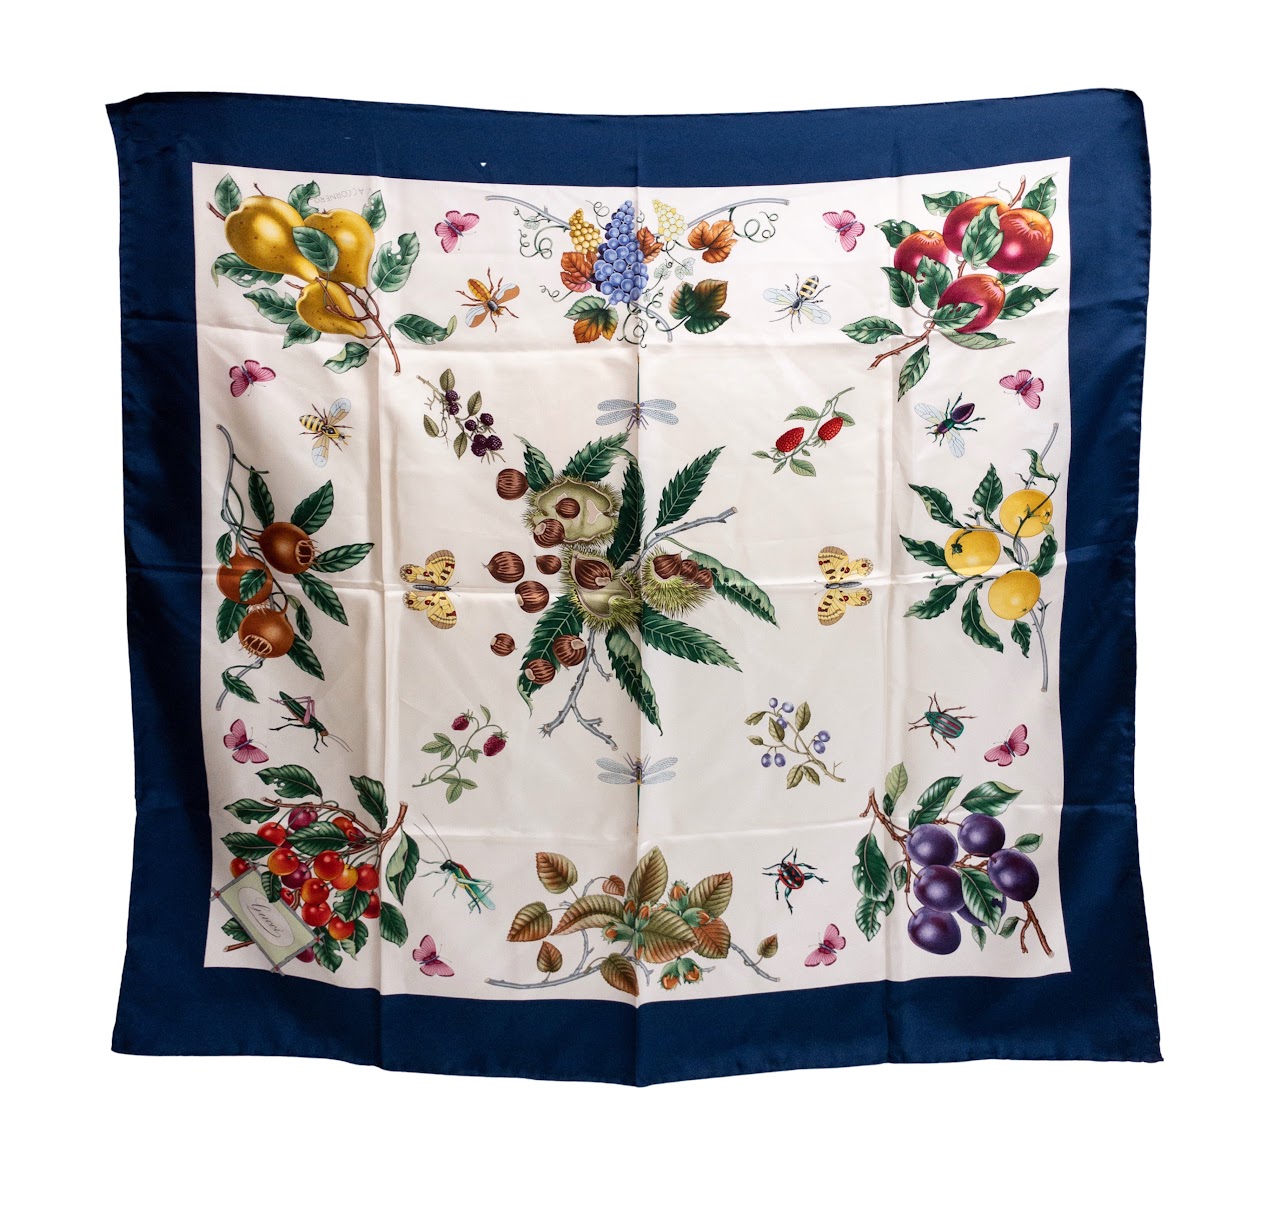 Gucci Vintage Fruit and Insect Silk Scarf